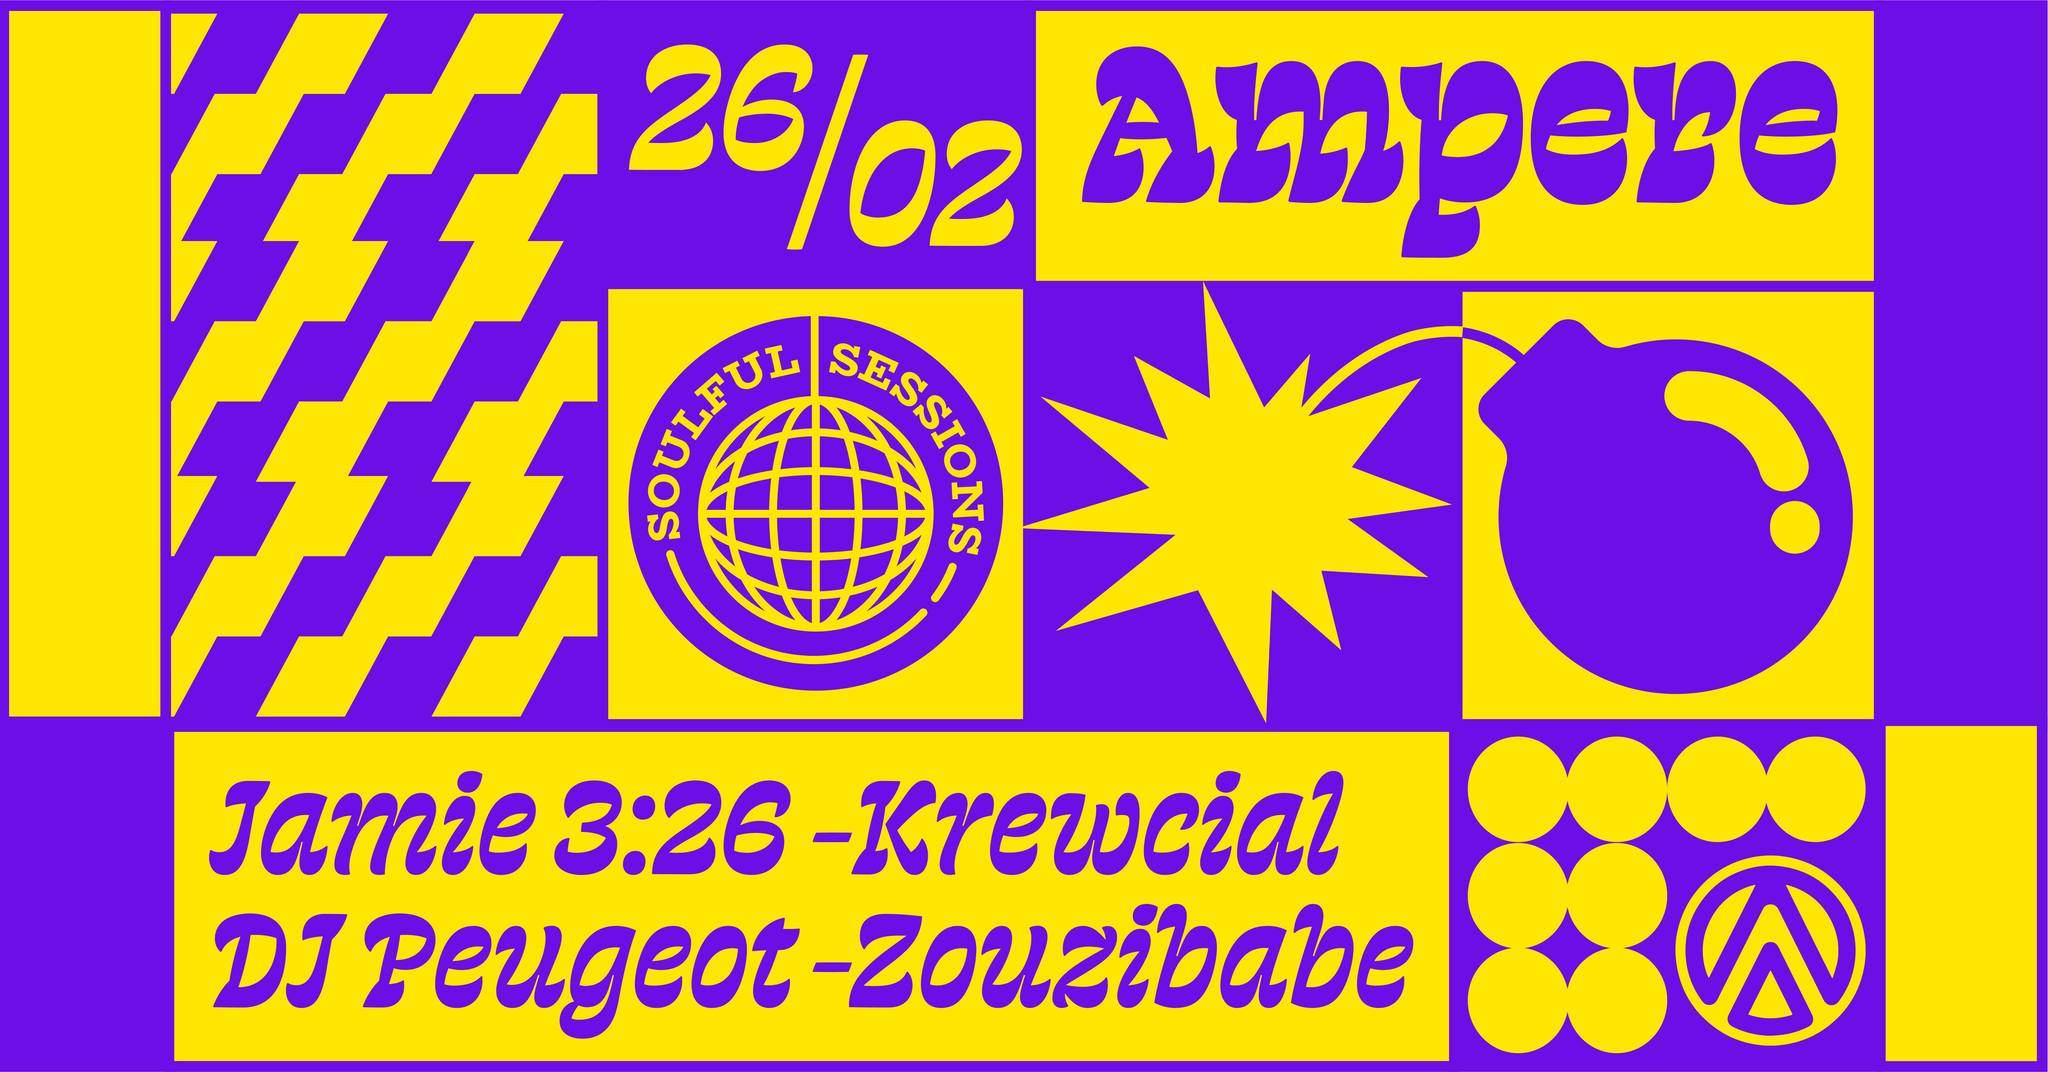 Soulful Sessions with Jamie 3:26 & krewcial - Página frontal